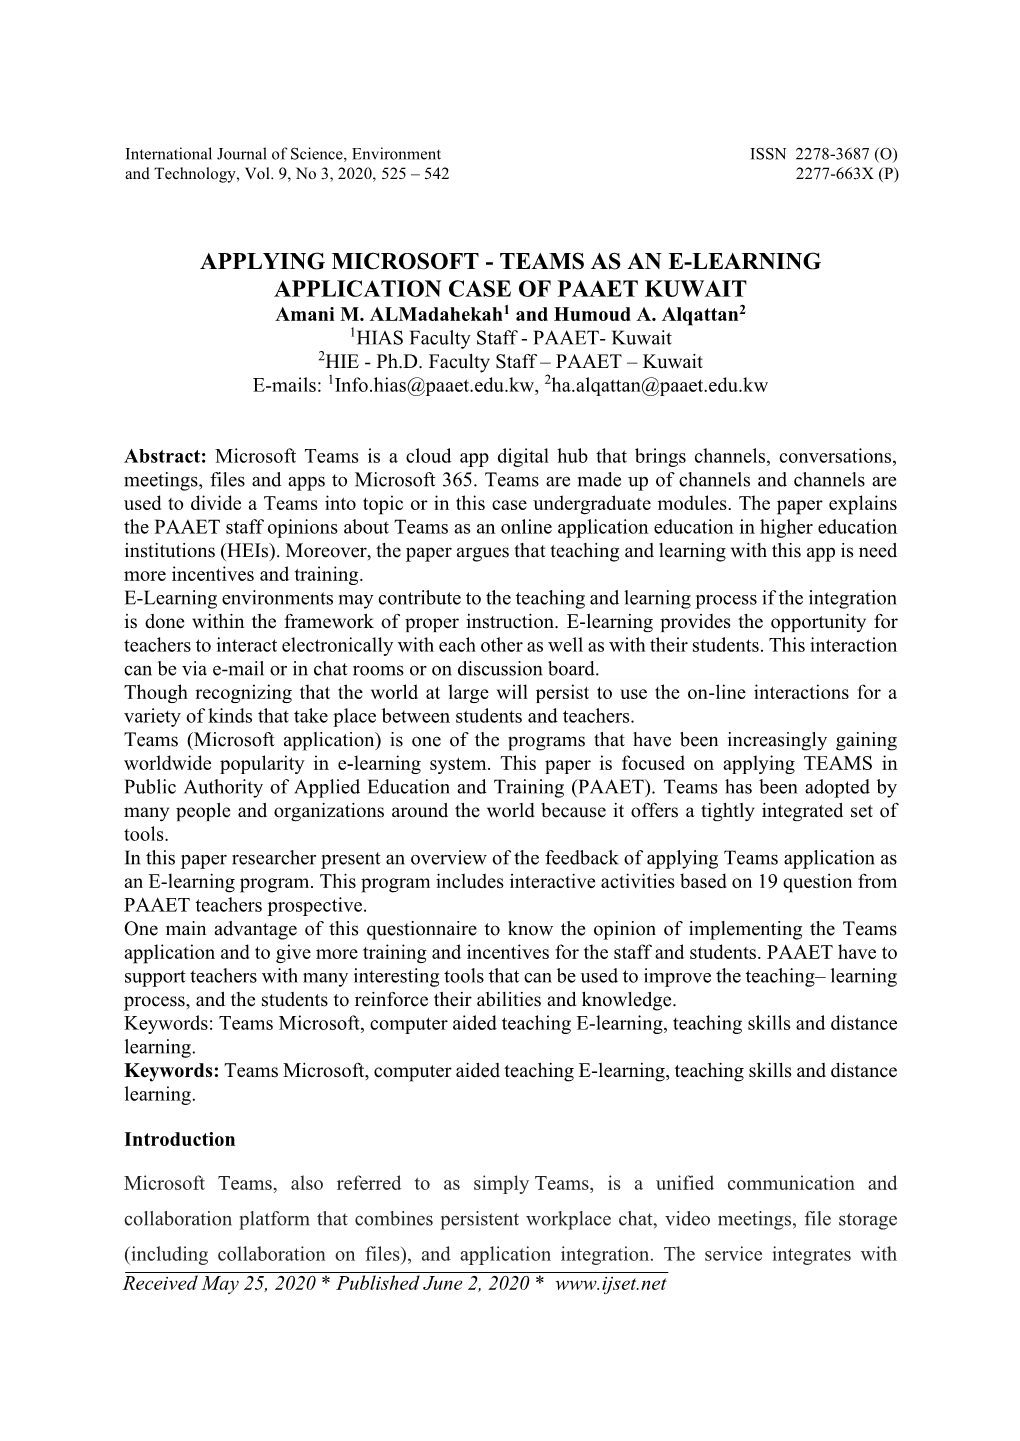 APPLYING MICROSOFT - TEAMS AS an E-LEARNING APPLICATION CASE of PAAET KUWAIT Amani M